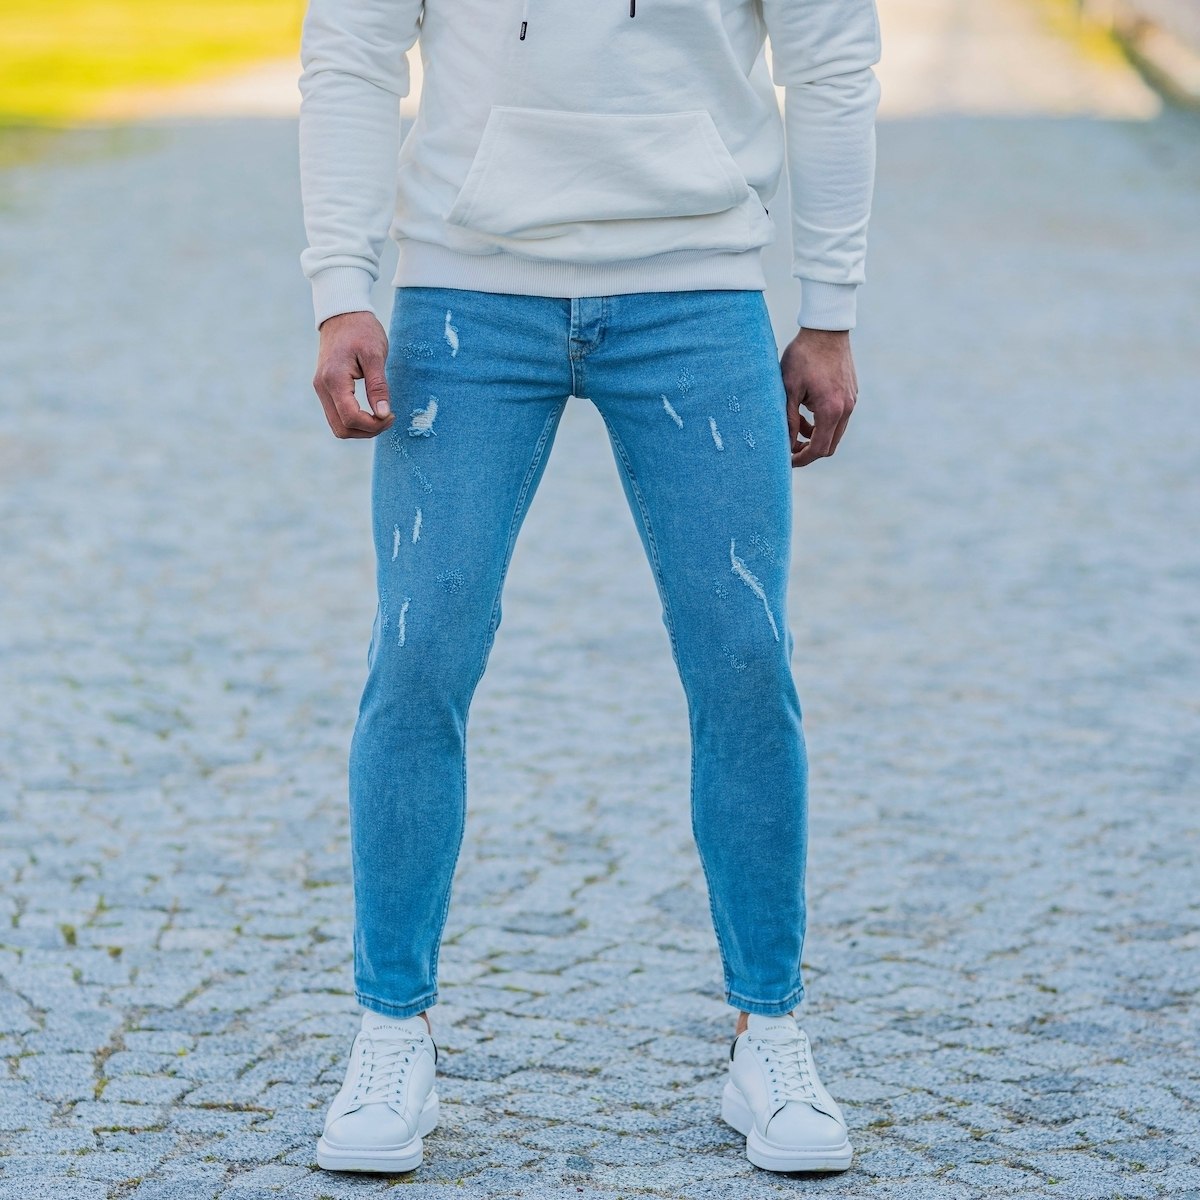 Men's Distorted Jeans In Ice Blue - 1